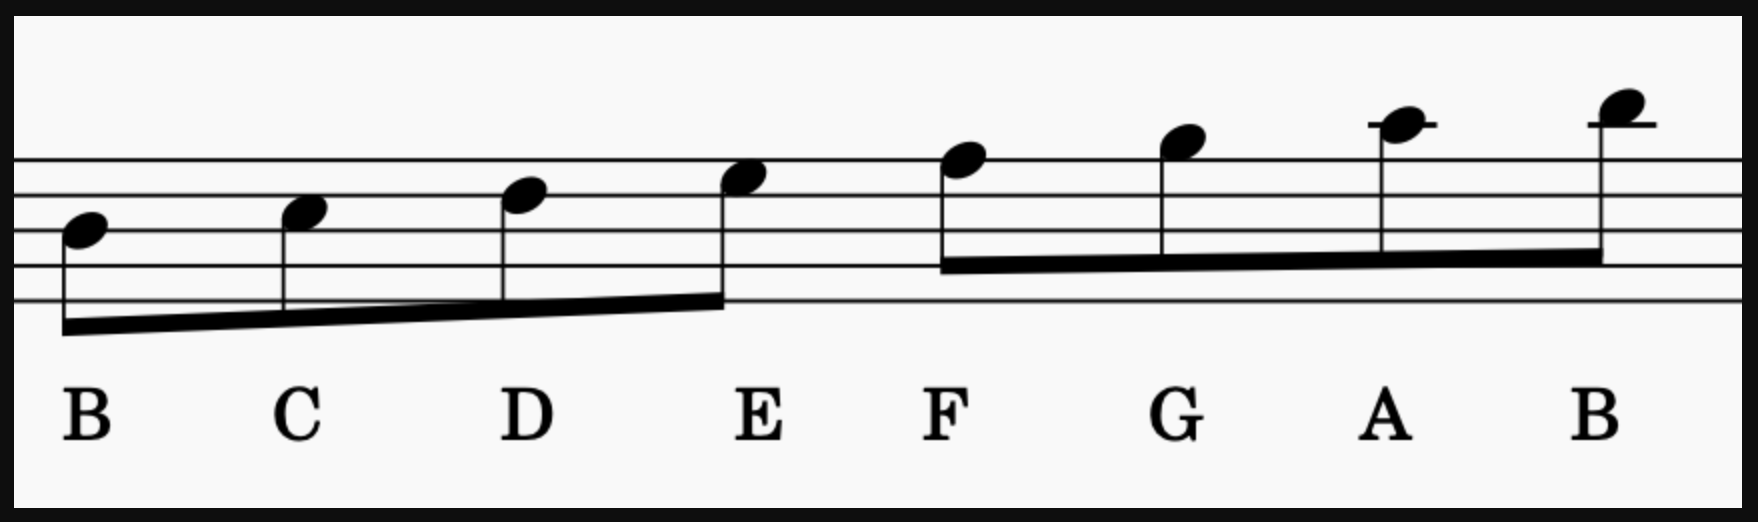 Modes: B Locrian Scale, or C major starting from B